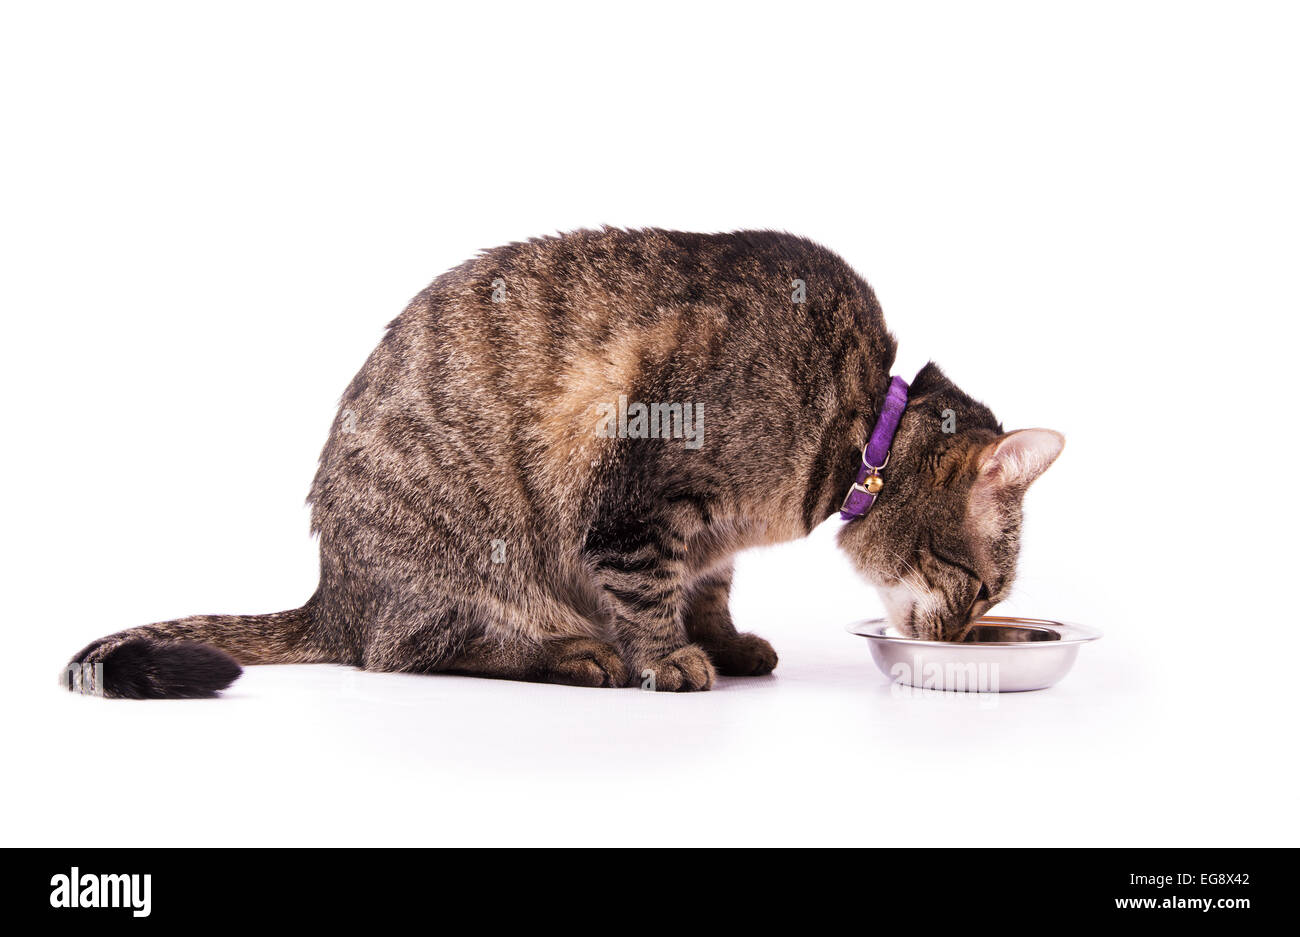 Profile of a brown tabby cat eating from a silver bowl, on white background Stock Photo